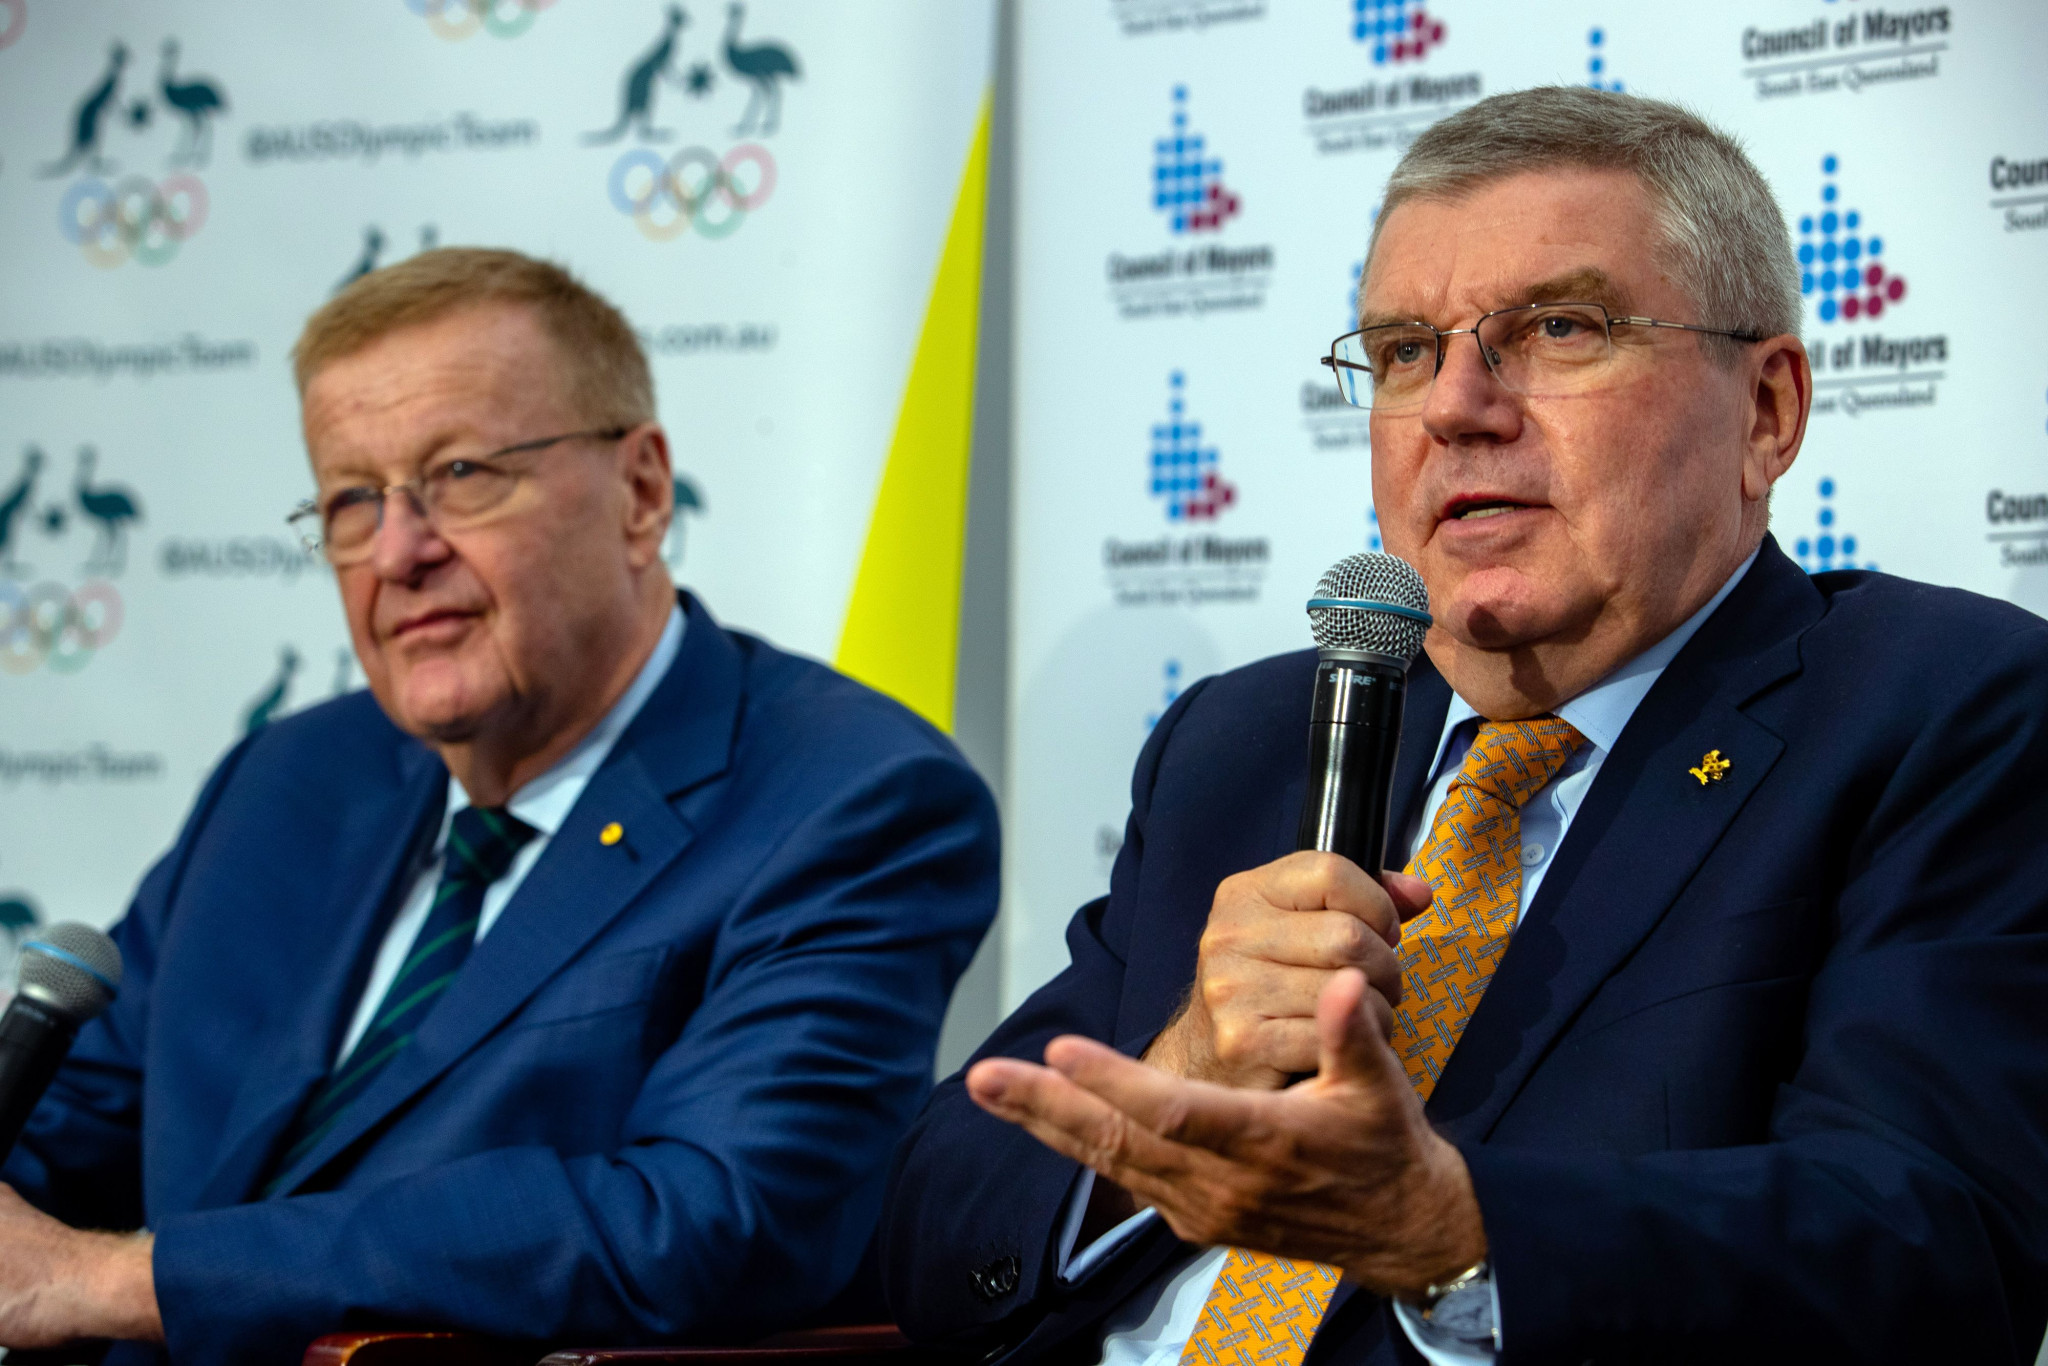 Australian John Coates, left, has been re-elected President of the International Council of Arbitration for Sport ©Getty Images